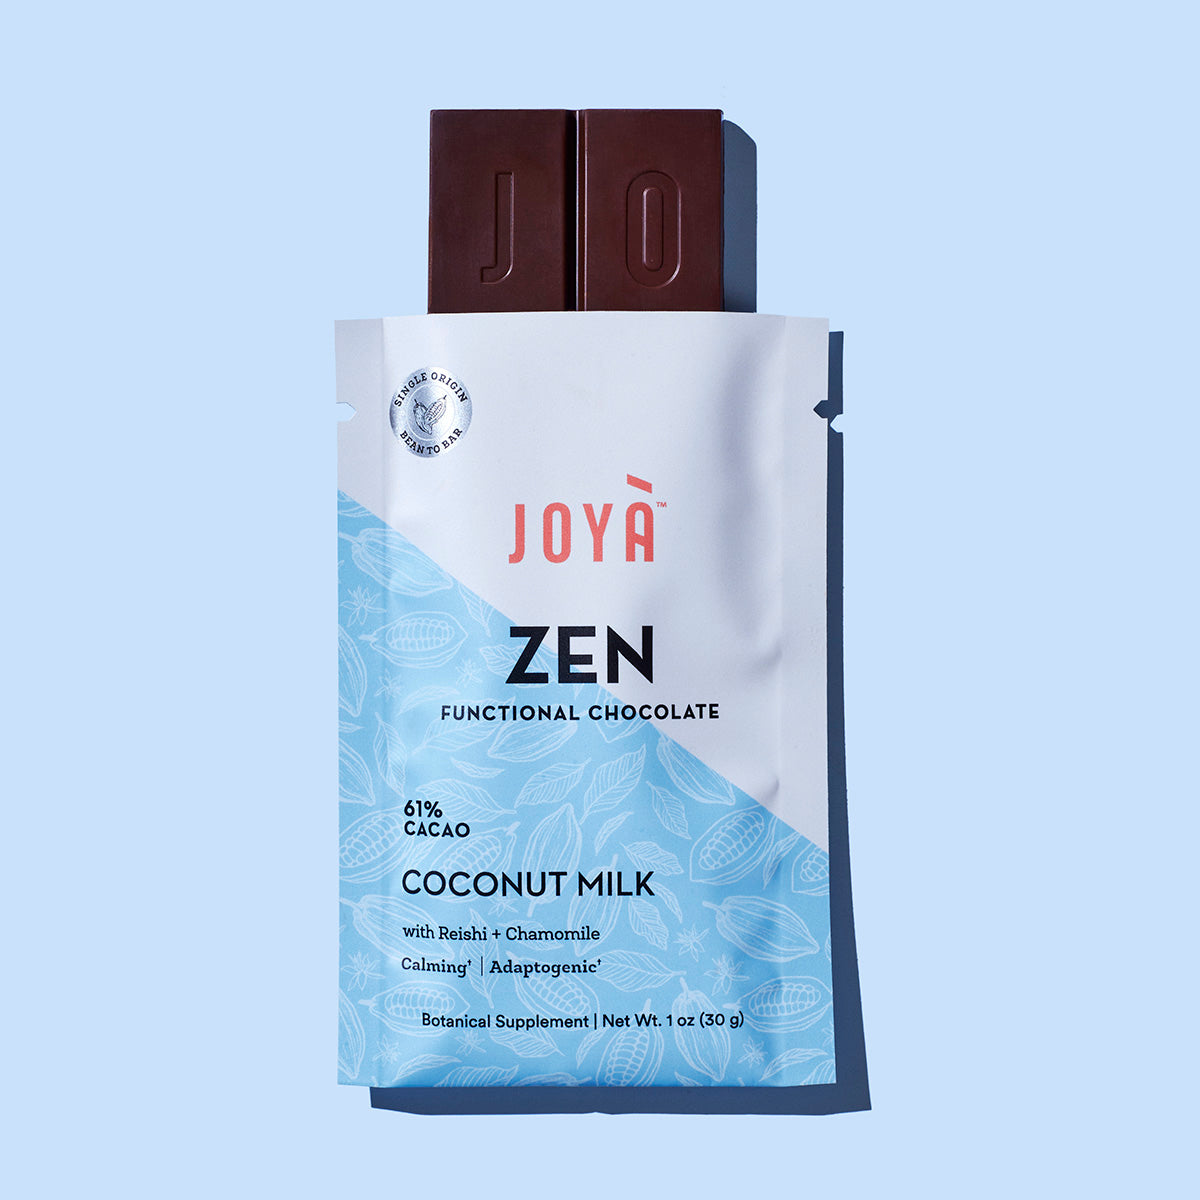 Zen Functional Chocolate sitting on a blue tabletop